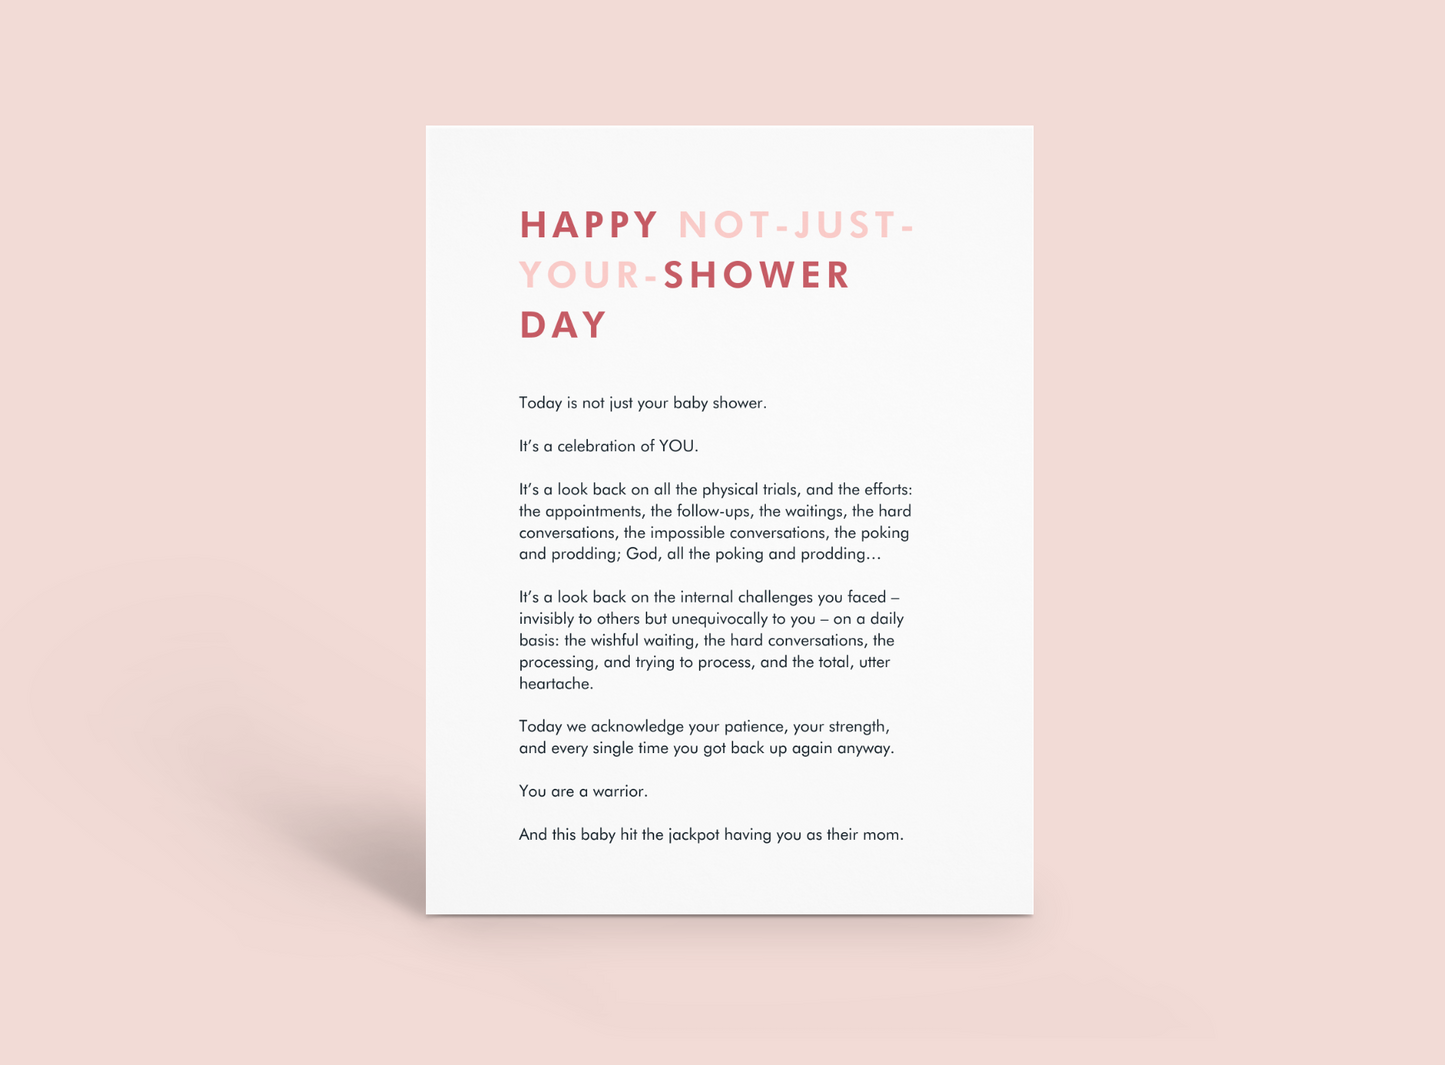 Not-Just-Your-Shower Day